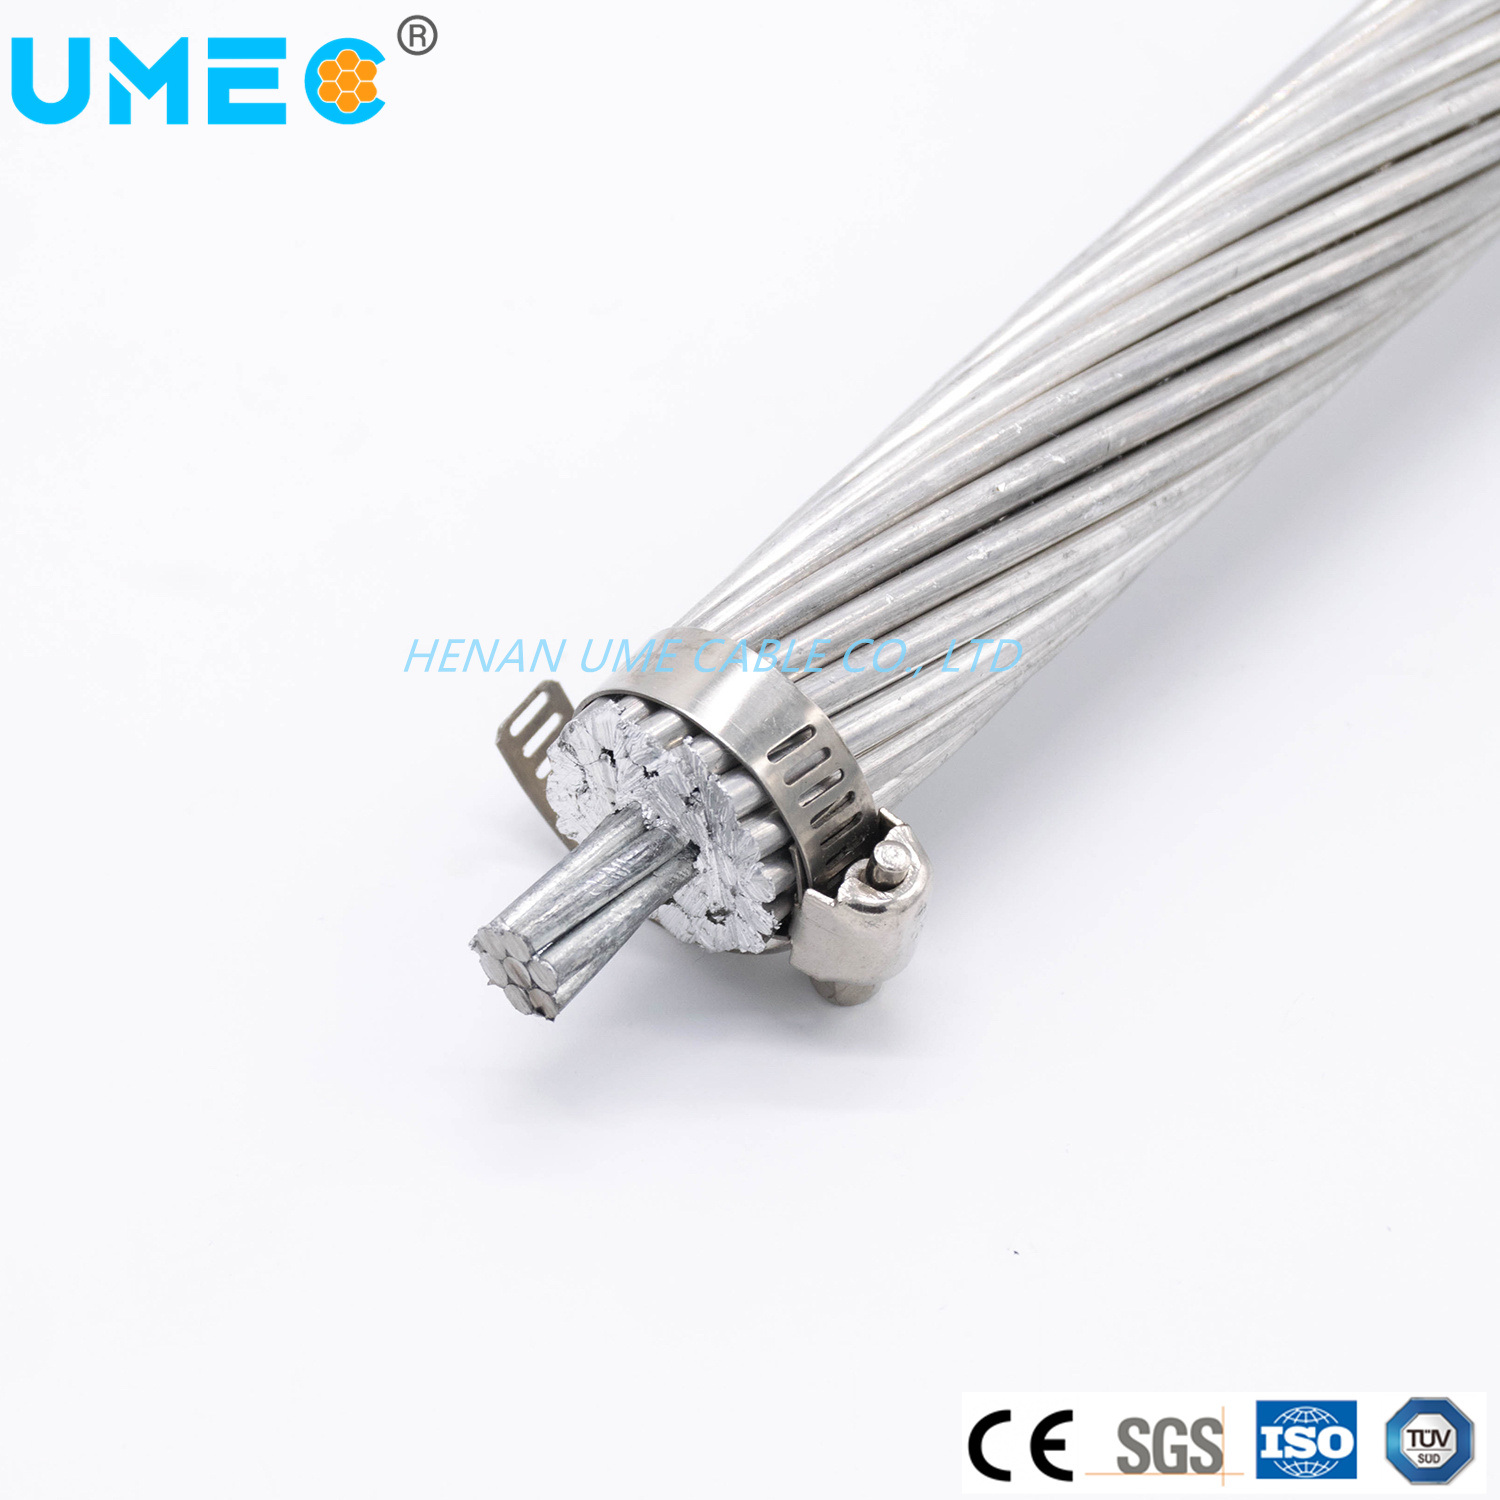 Wholesale High Voltage High Strength Stranding ACSR Cable 100mm2 125 mm2 160mm2 ACSR Cable (Aluminum Conductor Steel Reinforced)